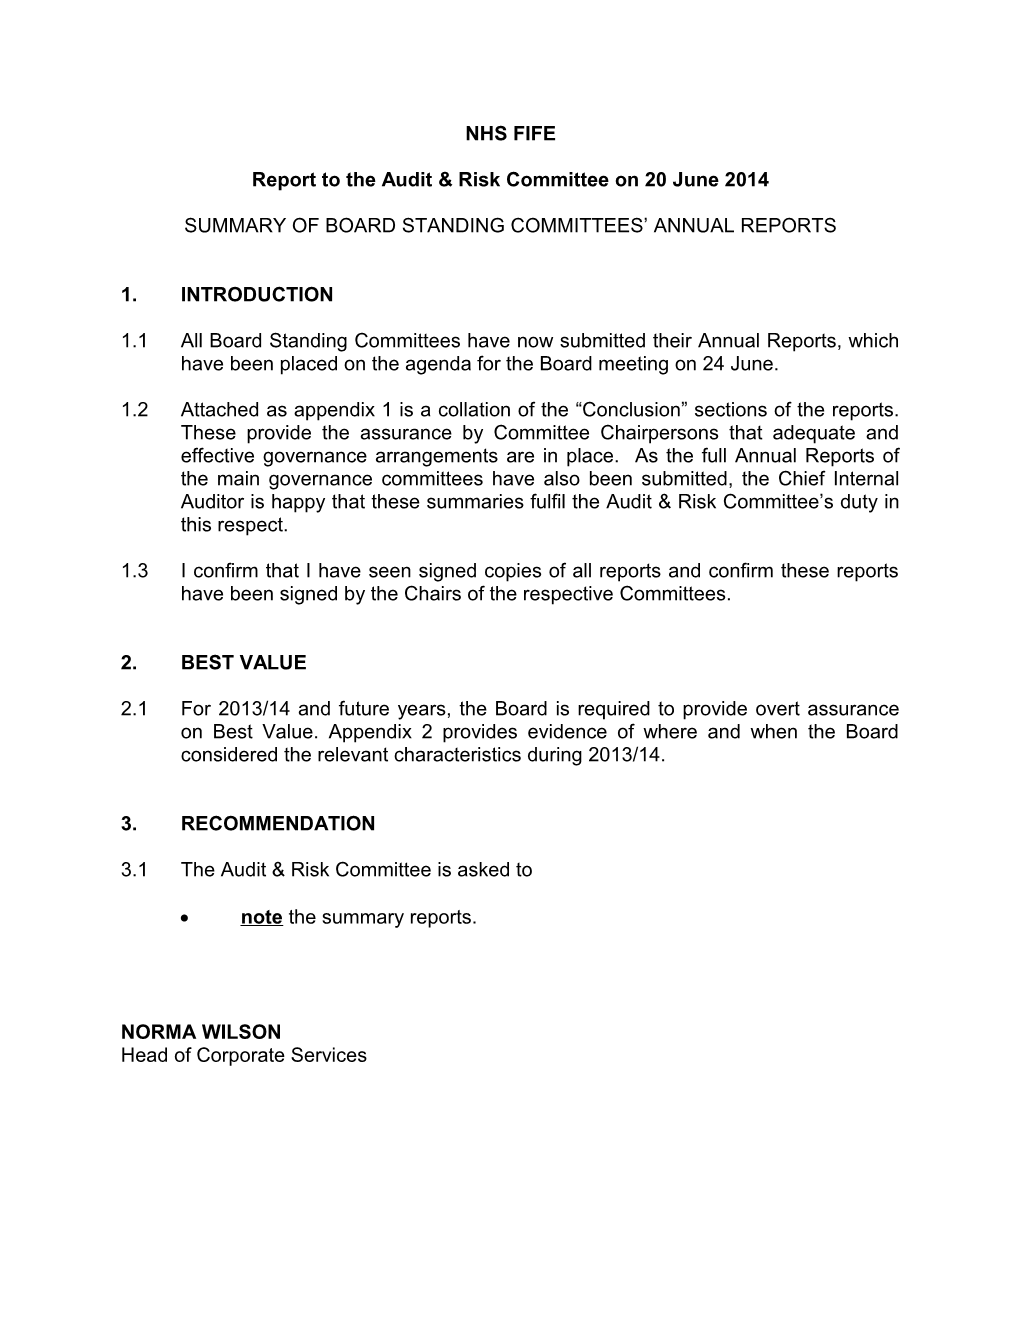 Report to the Audit & Risk Committee on 20 June 2014